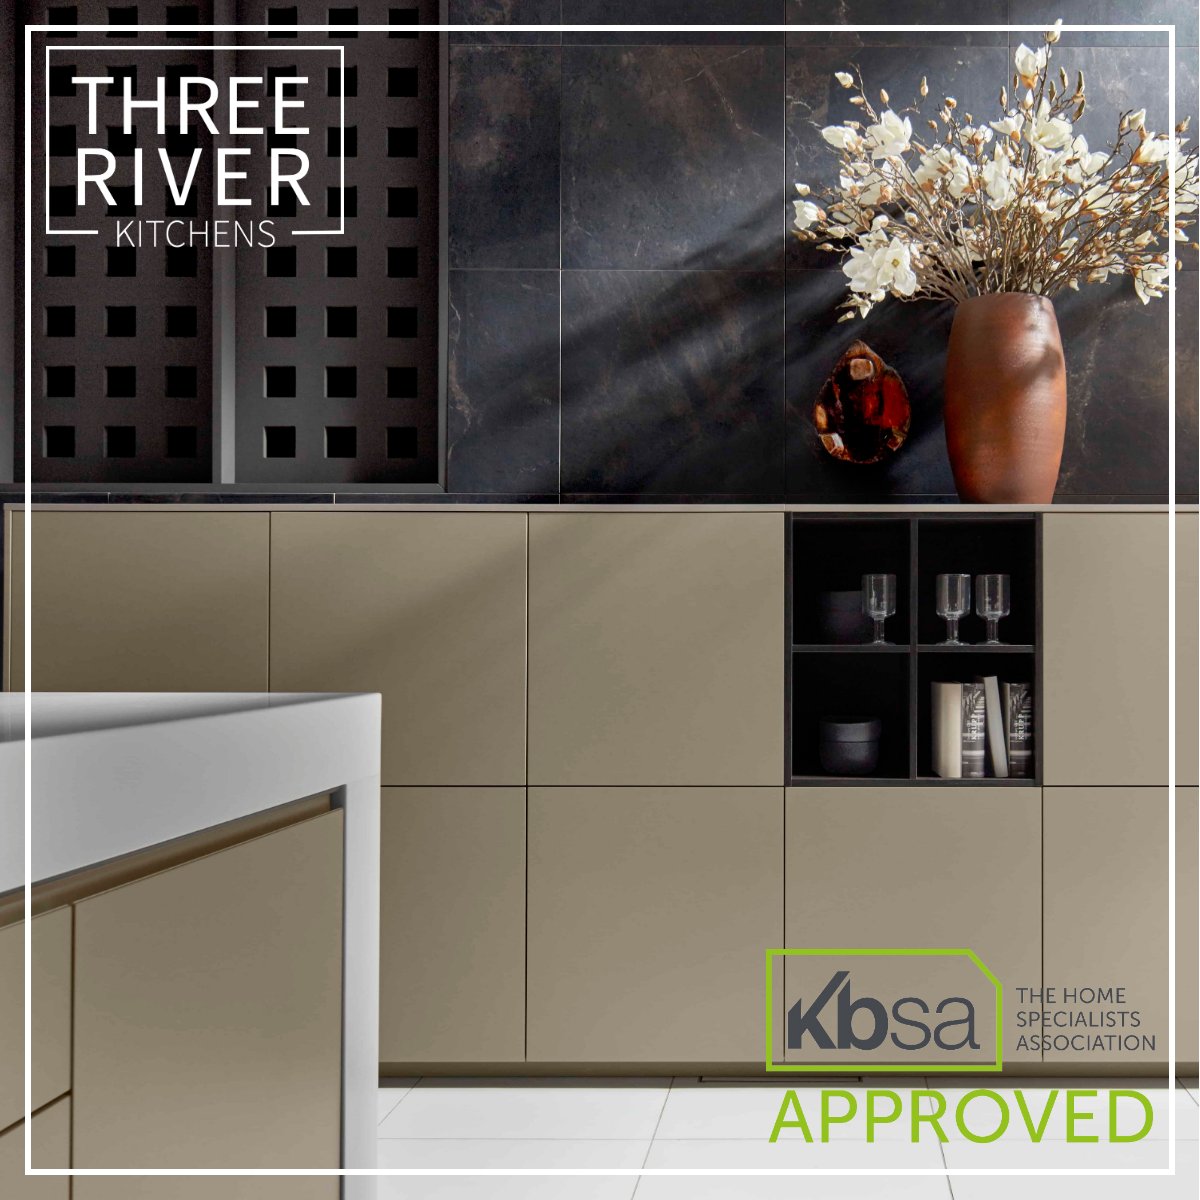 Experience bespoke kitchen designs with the peace of mind KBSA membership brings. Book your consultation with Three River Kitchens today! #kitchendesign #kitchenideas #kitchendesignideas #kitchendesigner #kitchendesigners #kitchendesigntrends #essexbusiness #essexkitchens